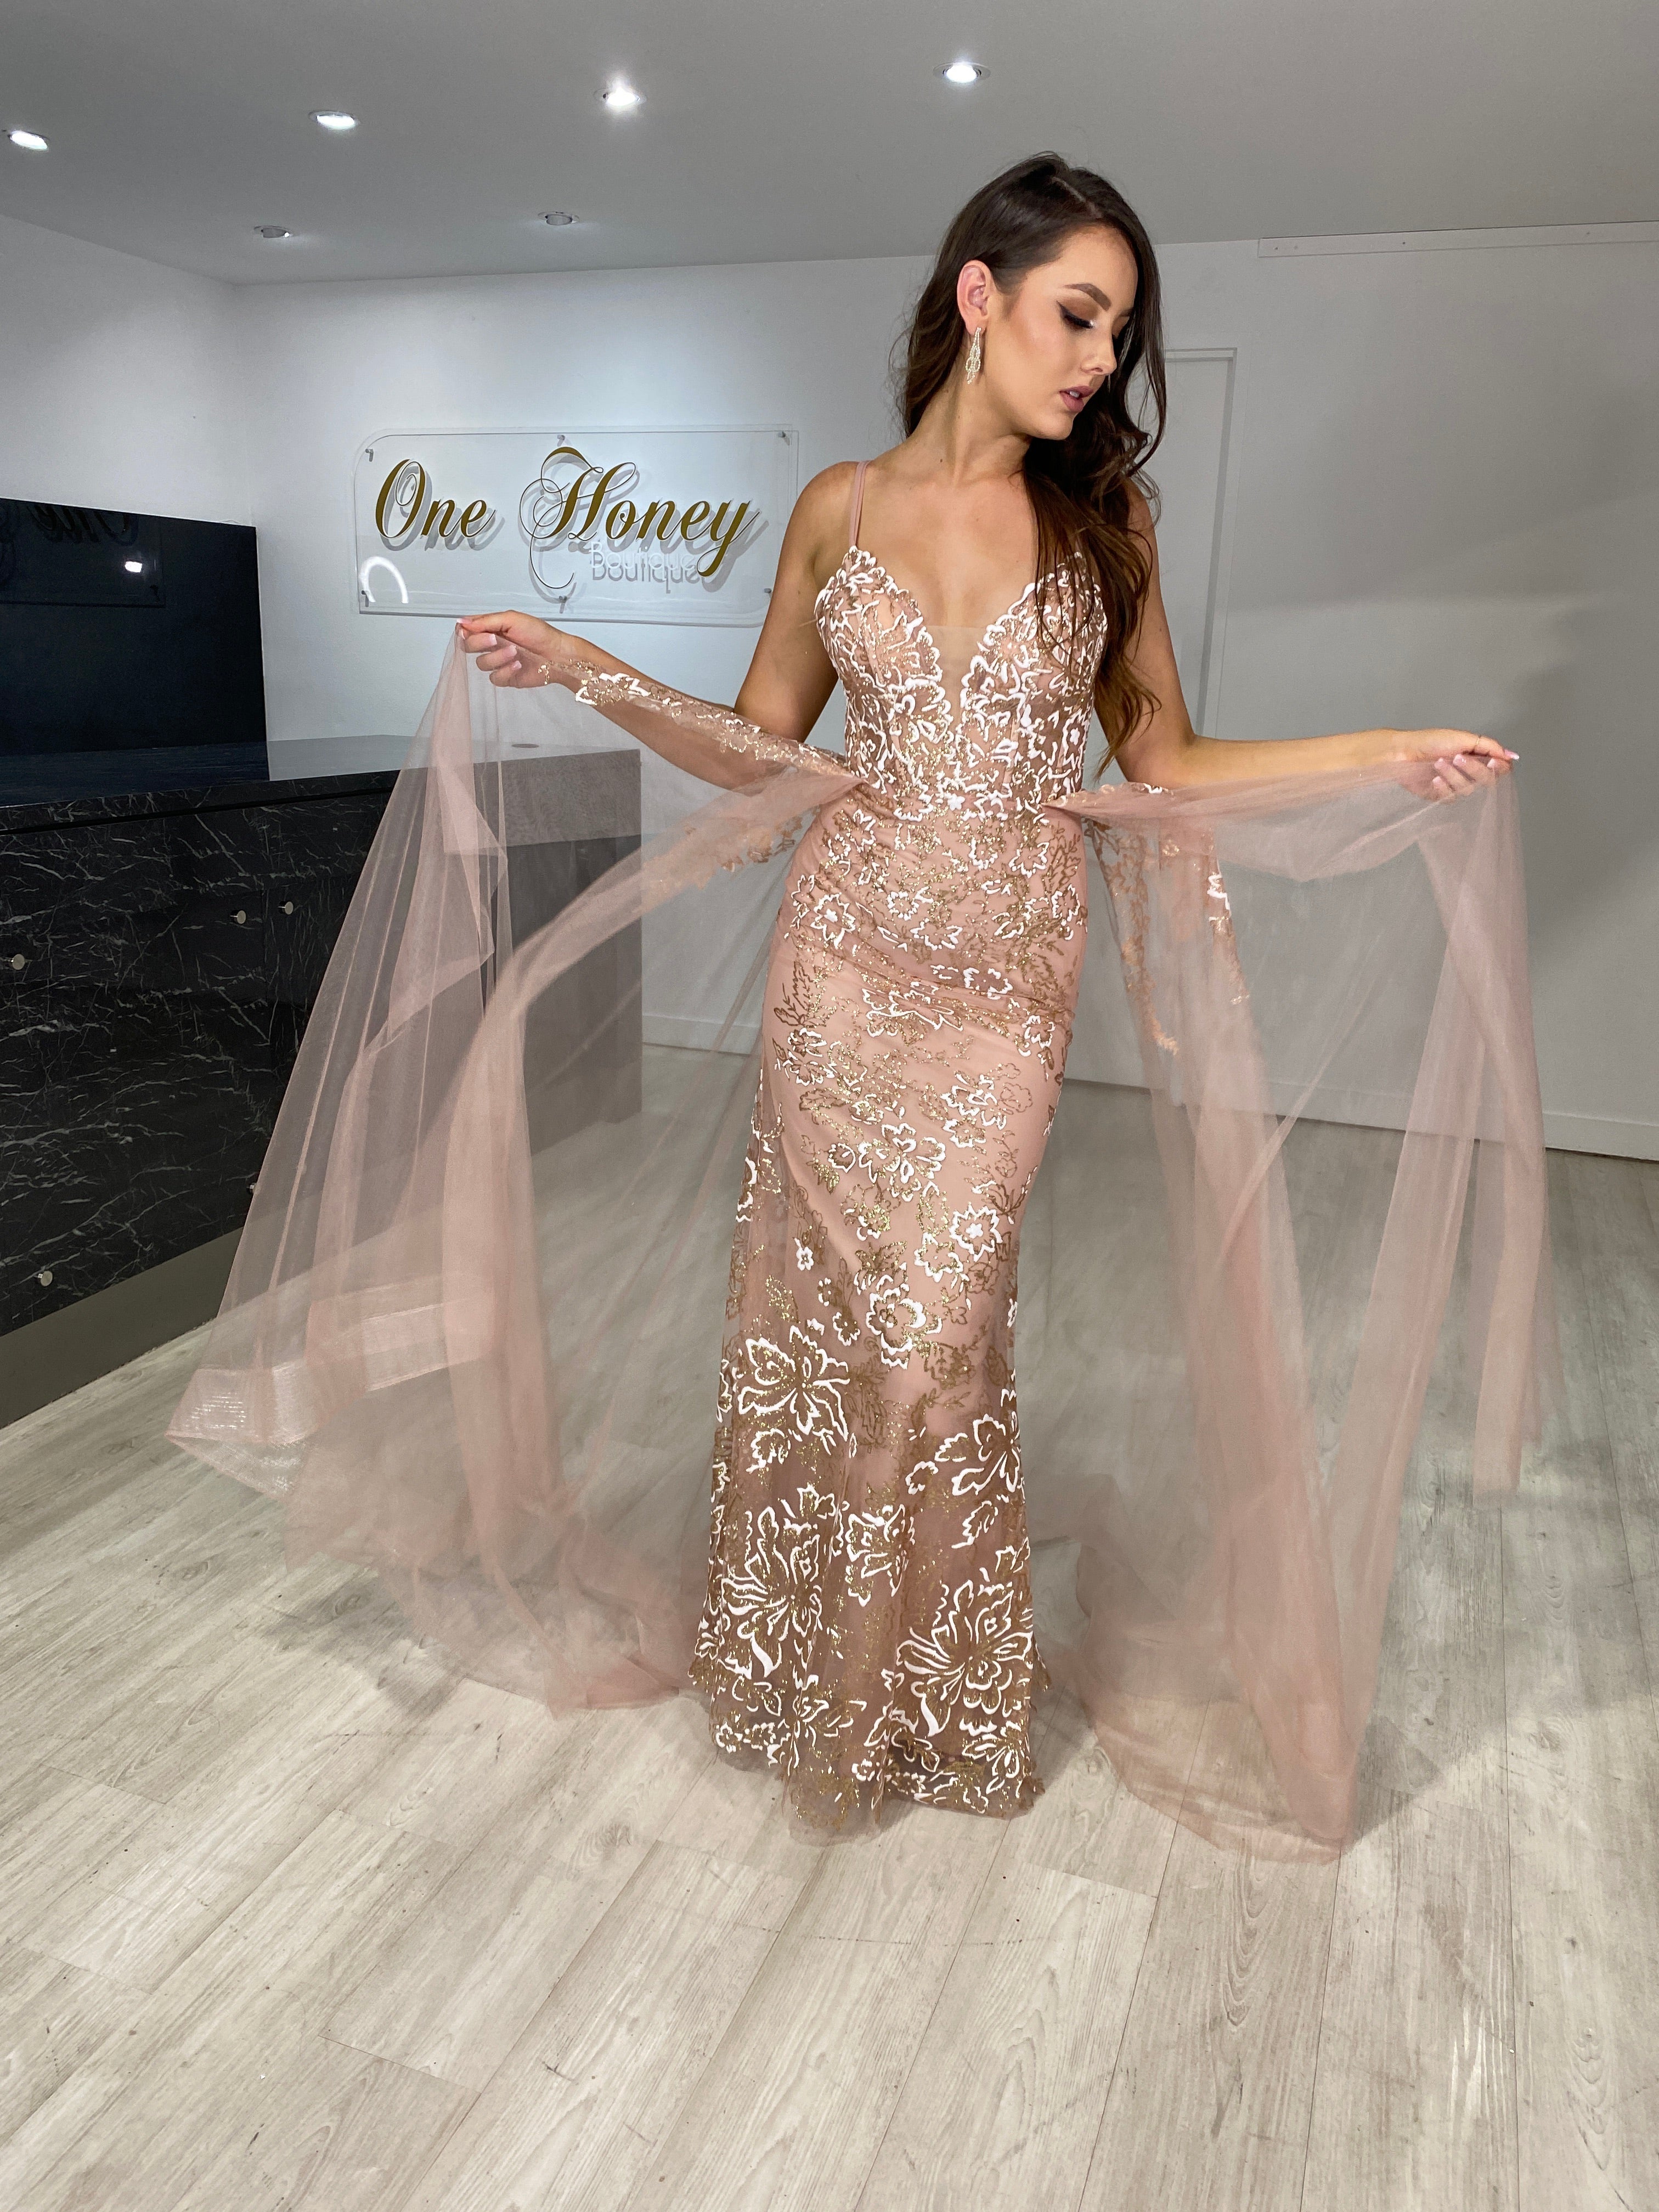 Honey Couture MADELINE Rose Gold Glitter Tulle Overlay Formal Gown Dress